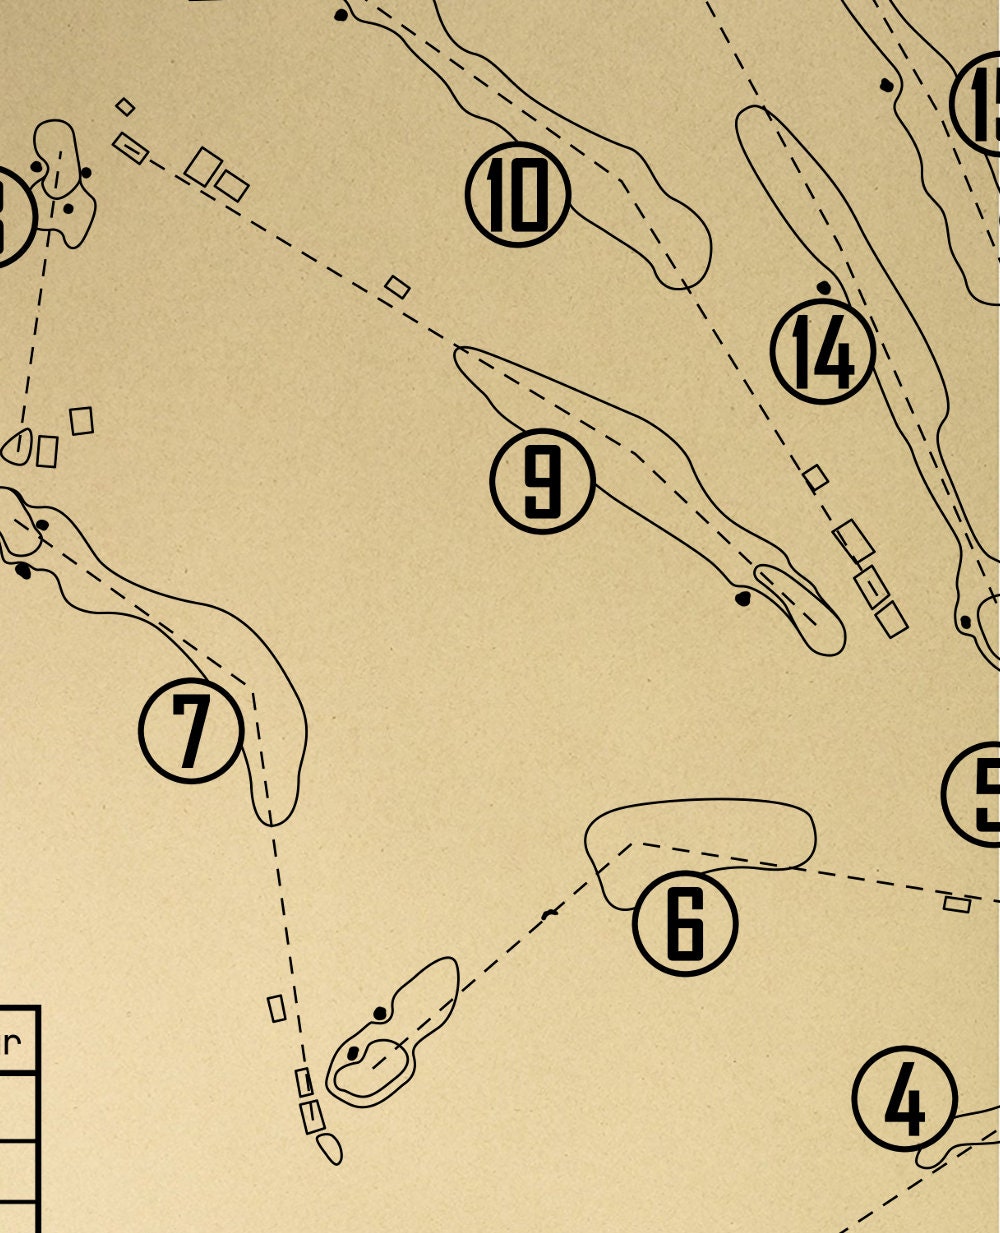 Lahinch Golf Club Old Course Outline (Print)